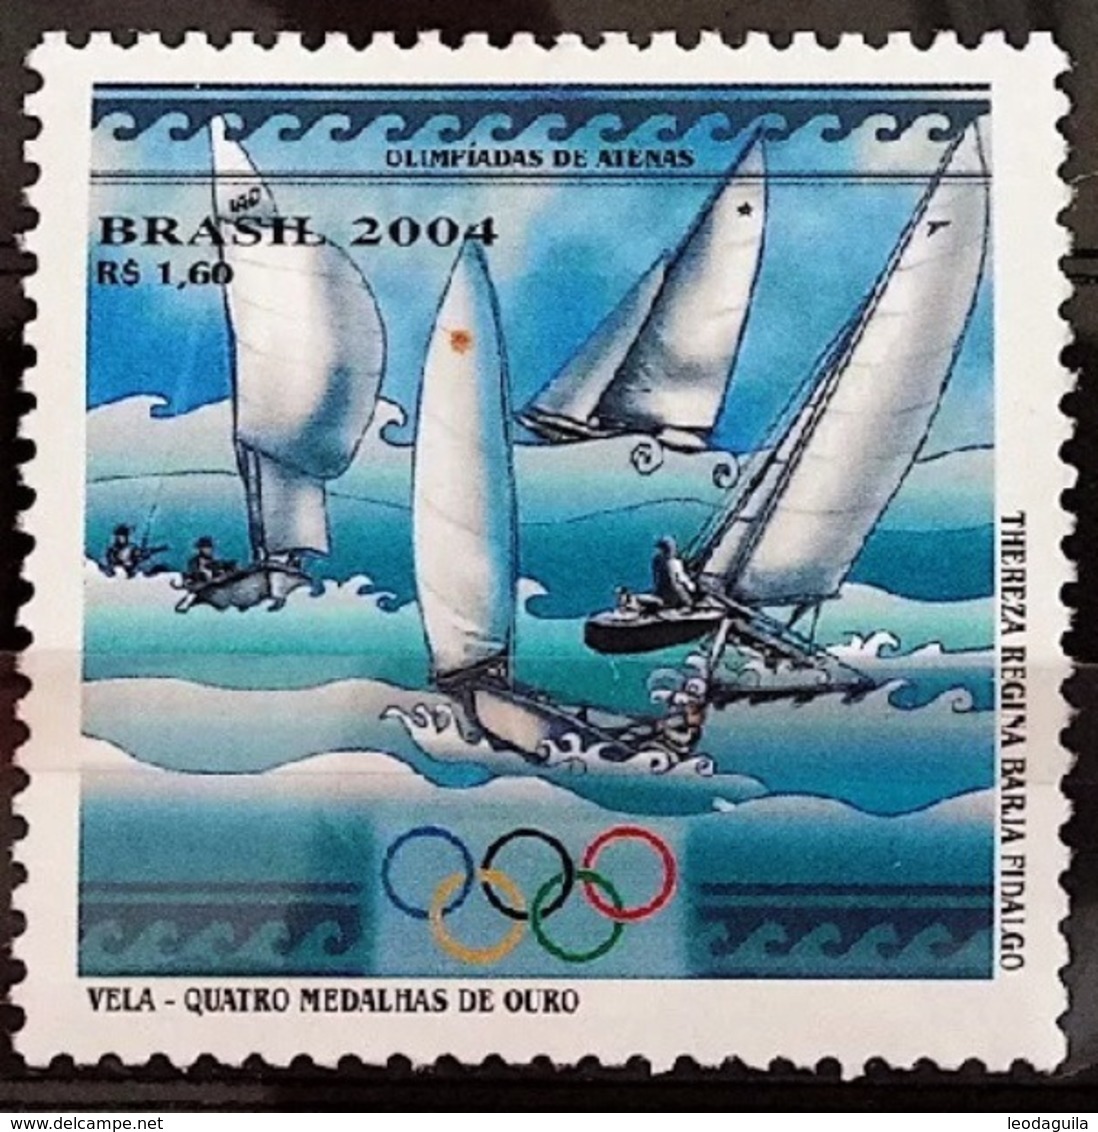 BRAZIL #3395 -  SAILING - OLYMPIC GAMES  ATHENS 2004  MINT - Nuovi